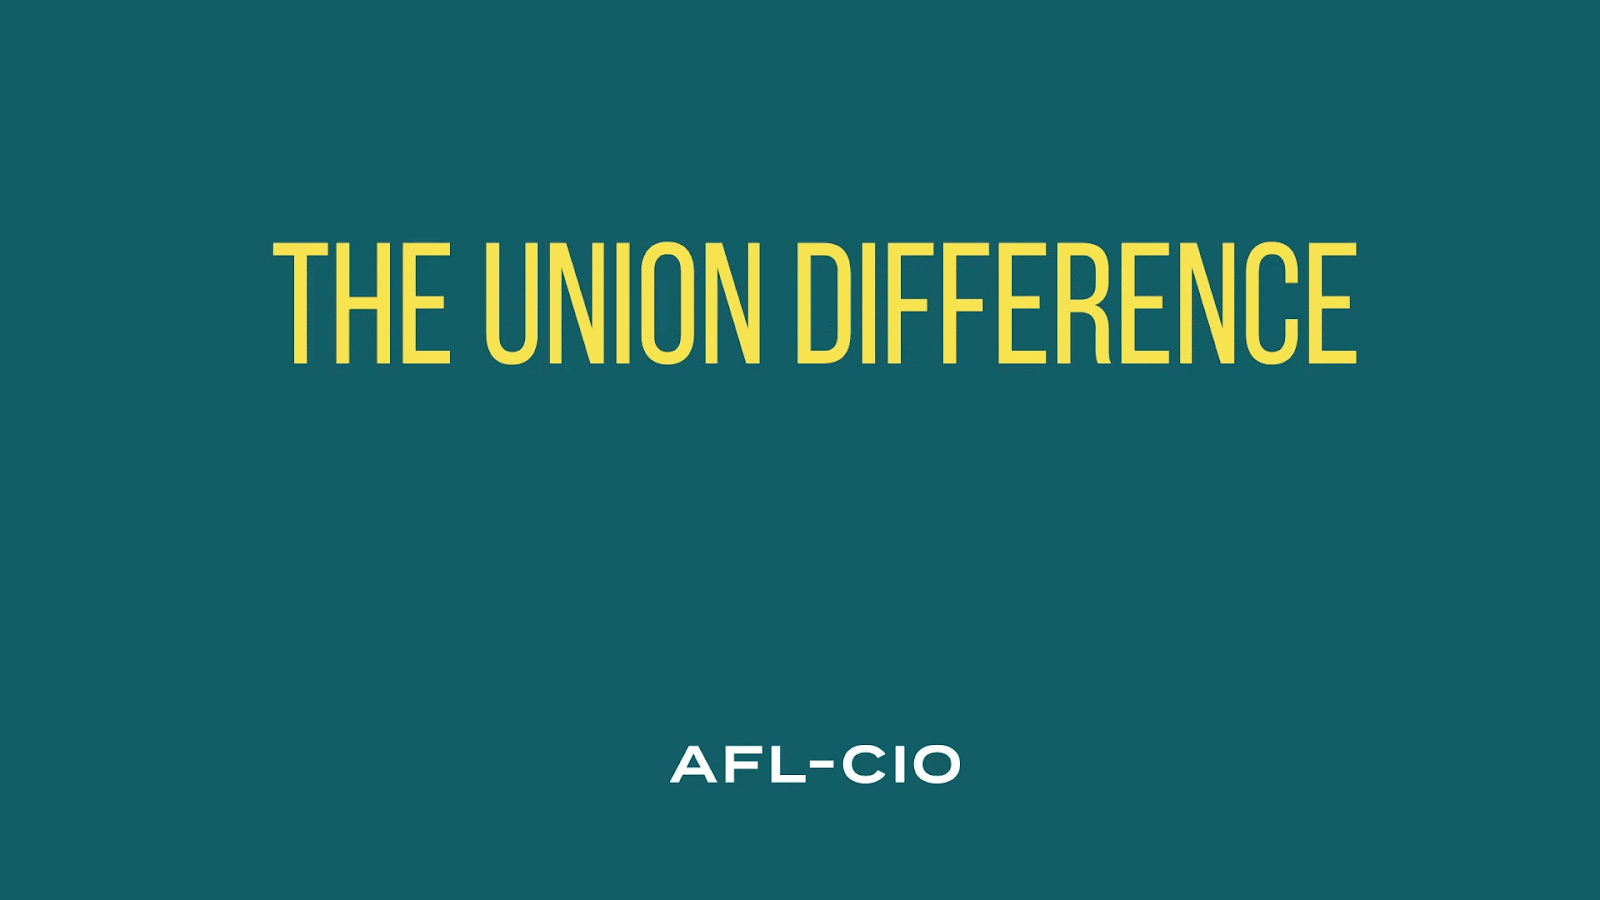 The Union Difference. AFL-CIO.